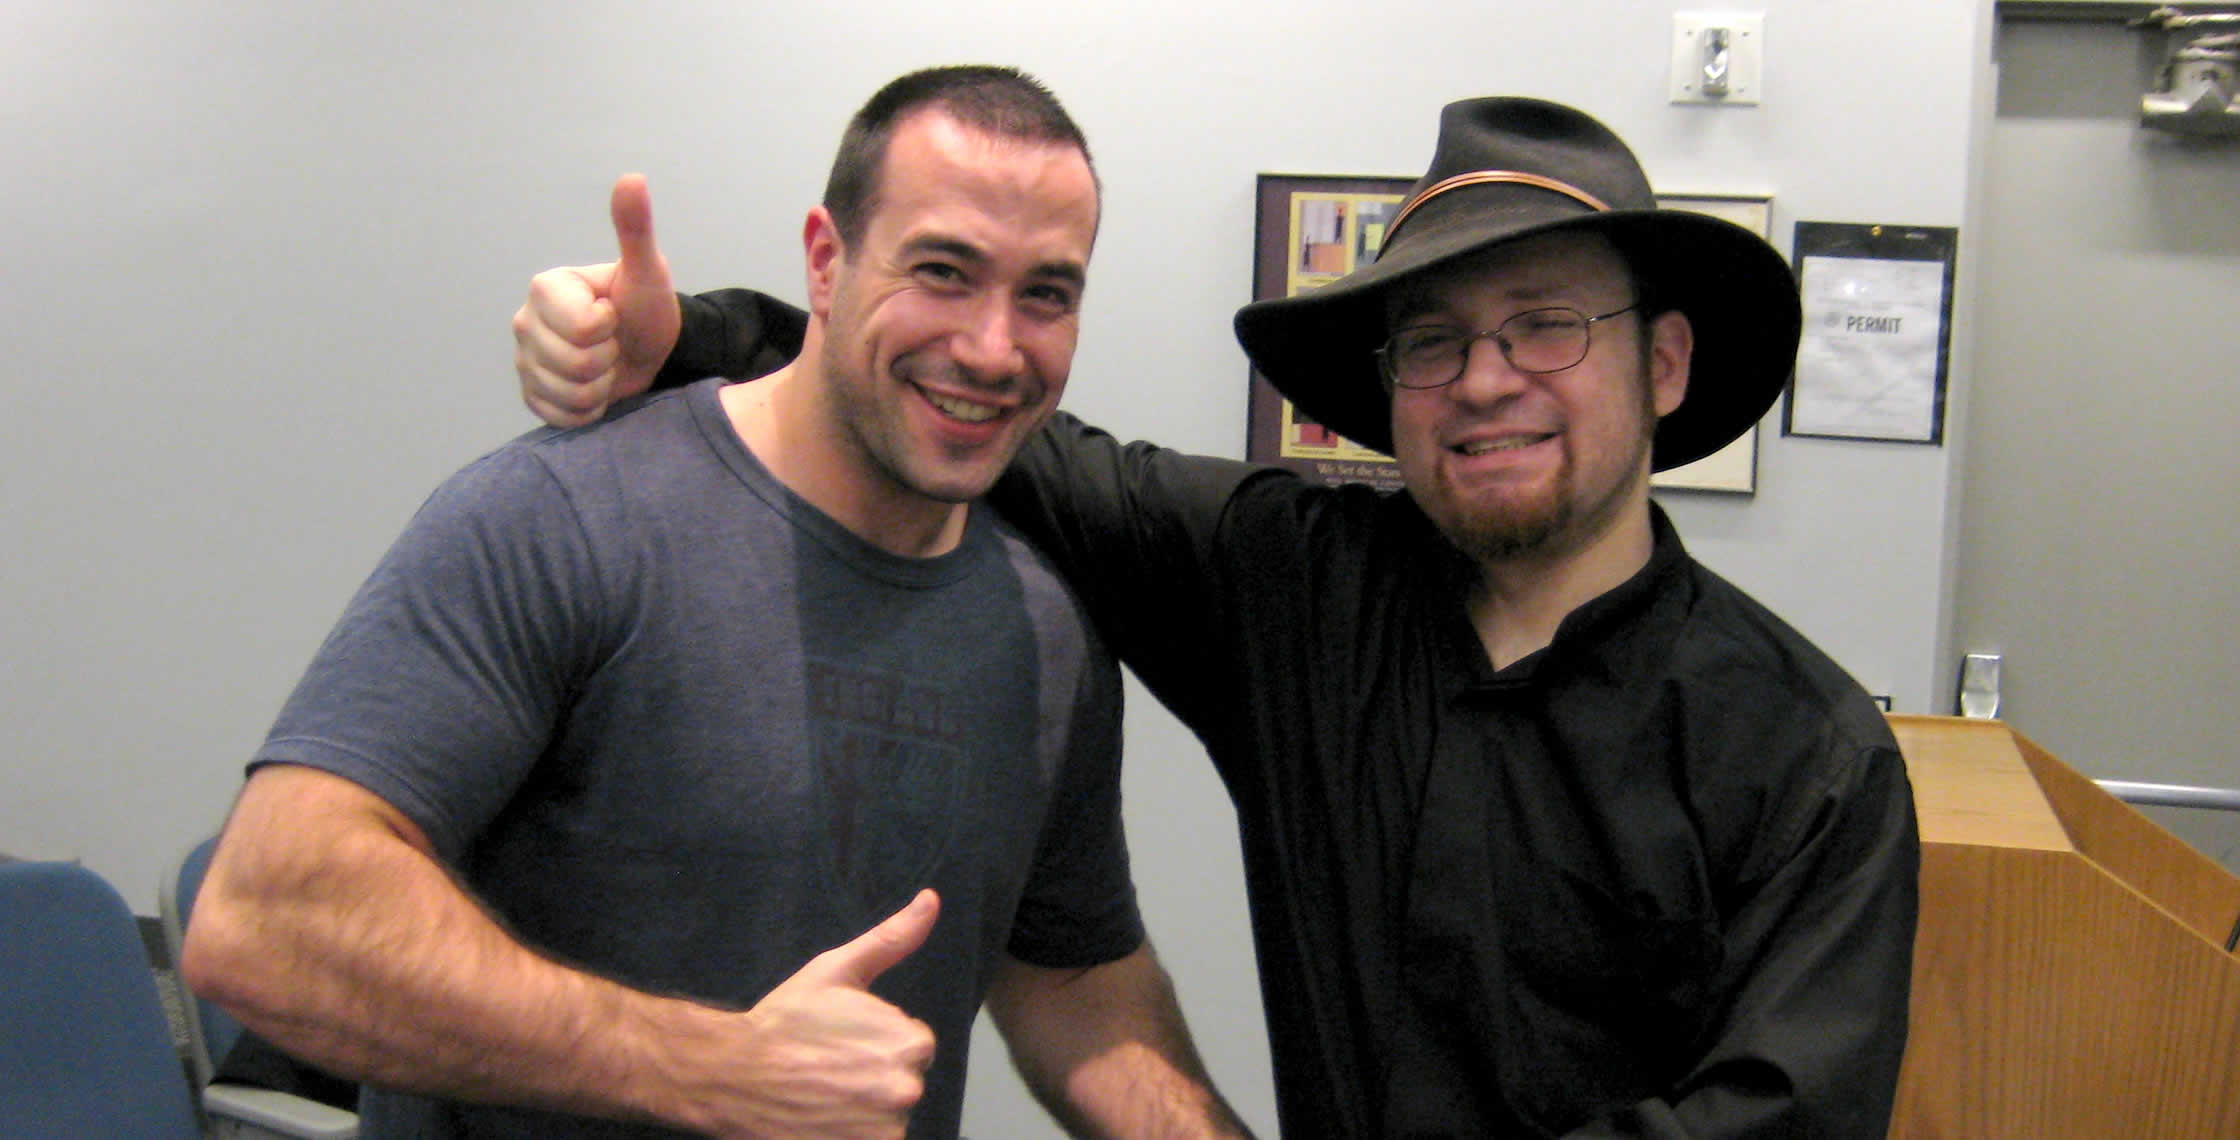 Ben Nadel at the New York ColdFusion User Group (Dec. 2008) with: Michael Dinowitz